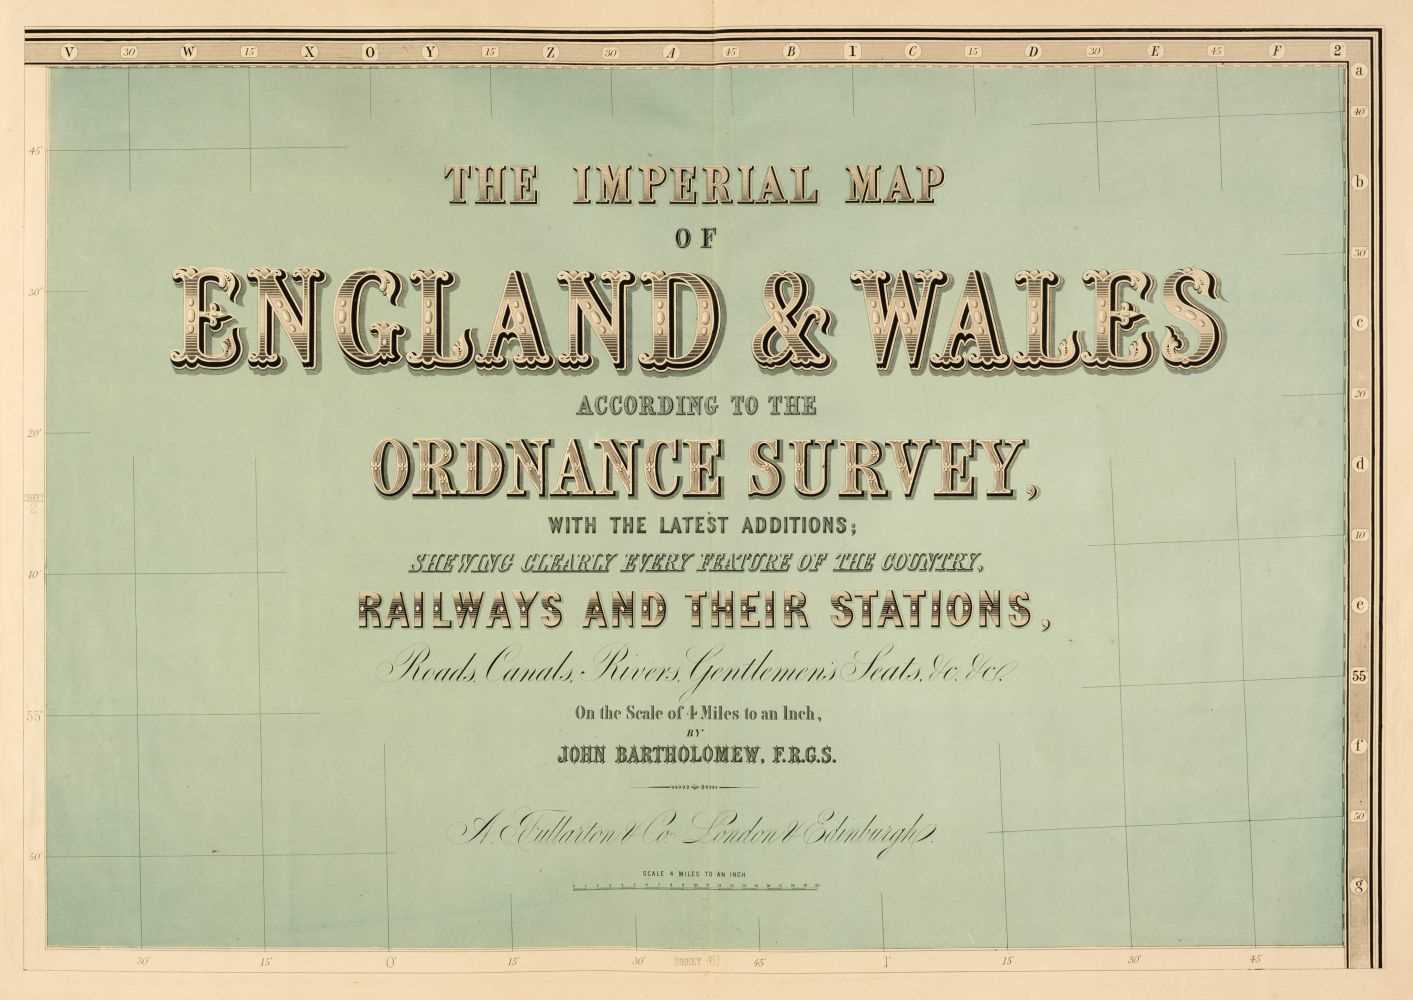 Lot 14 - England & Wales. Lewis (Samuel), A Map of England & Wales, circa 1840